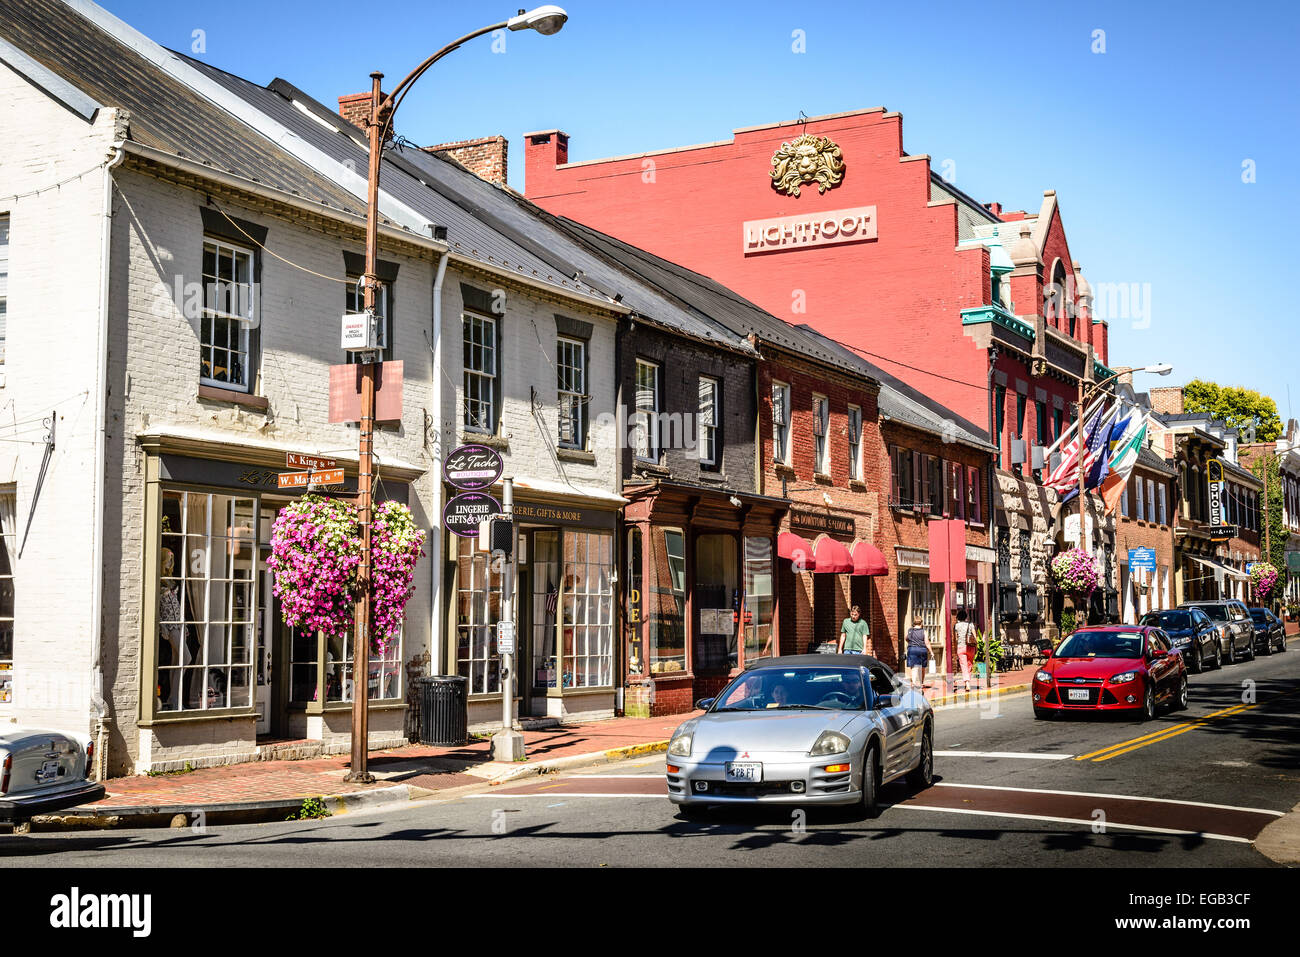 Lightfoot Restaurant and other businesses, North King Street, Leesburg, Virginia Stock Photo